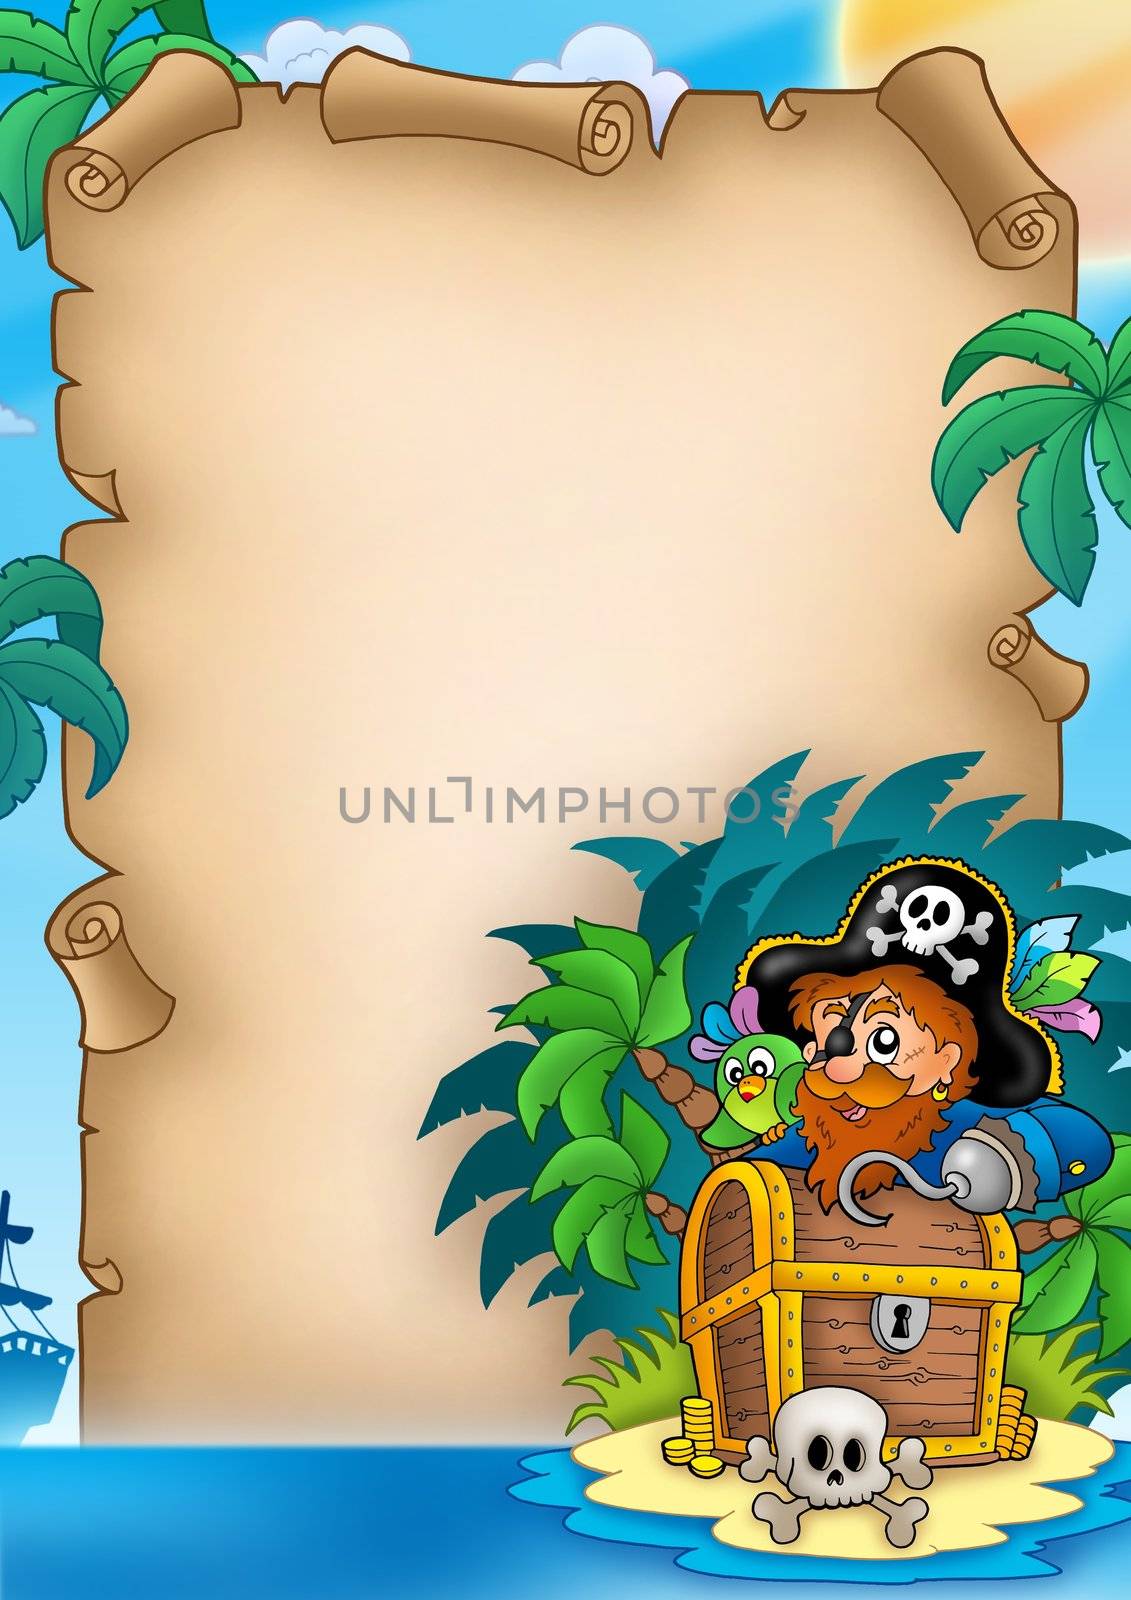 Parchment with pirate on island - color illustration.